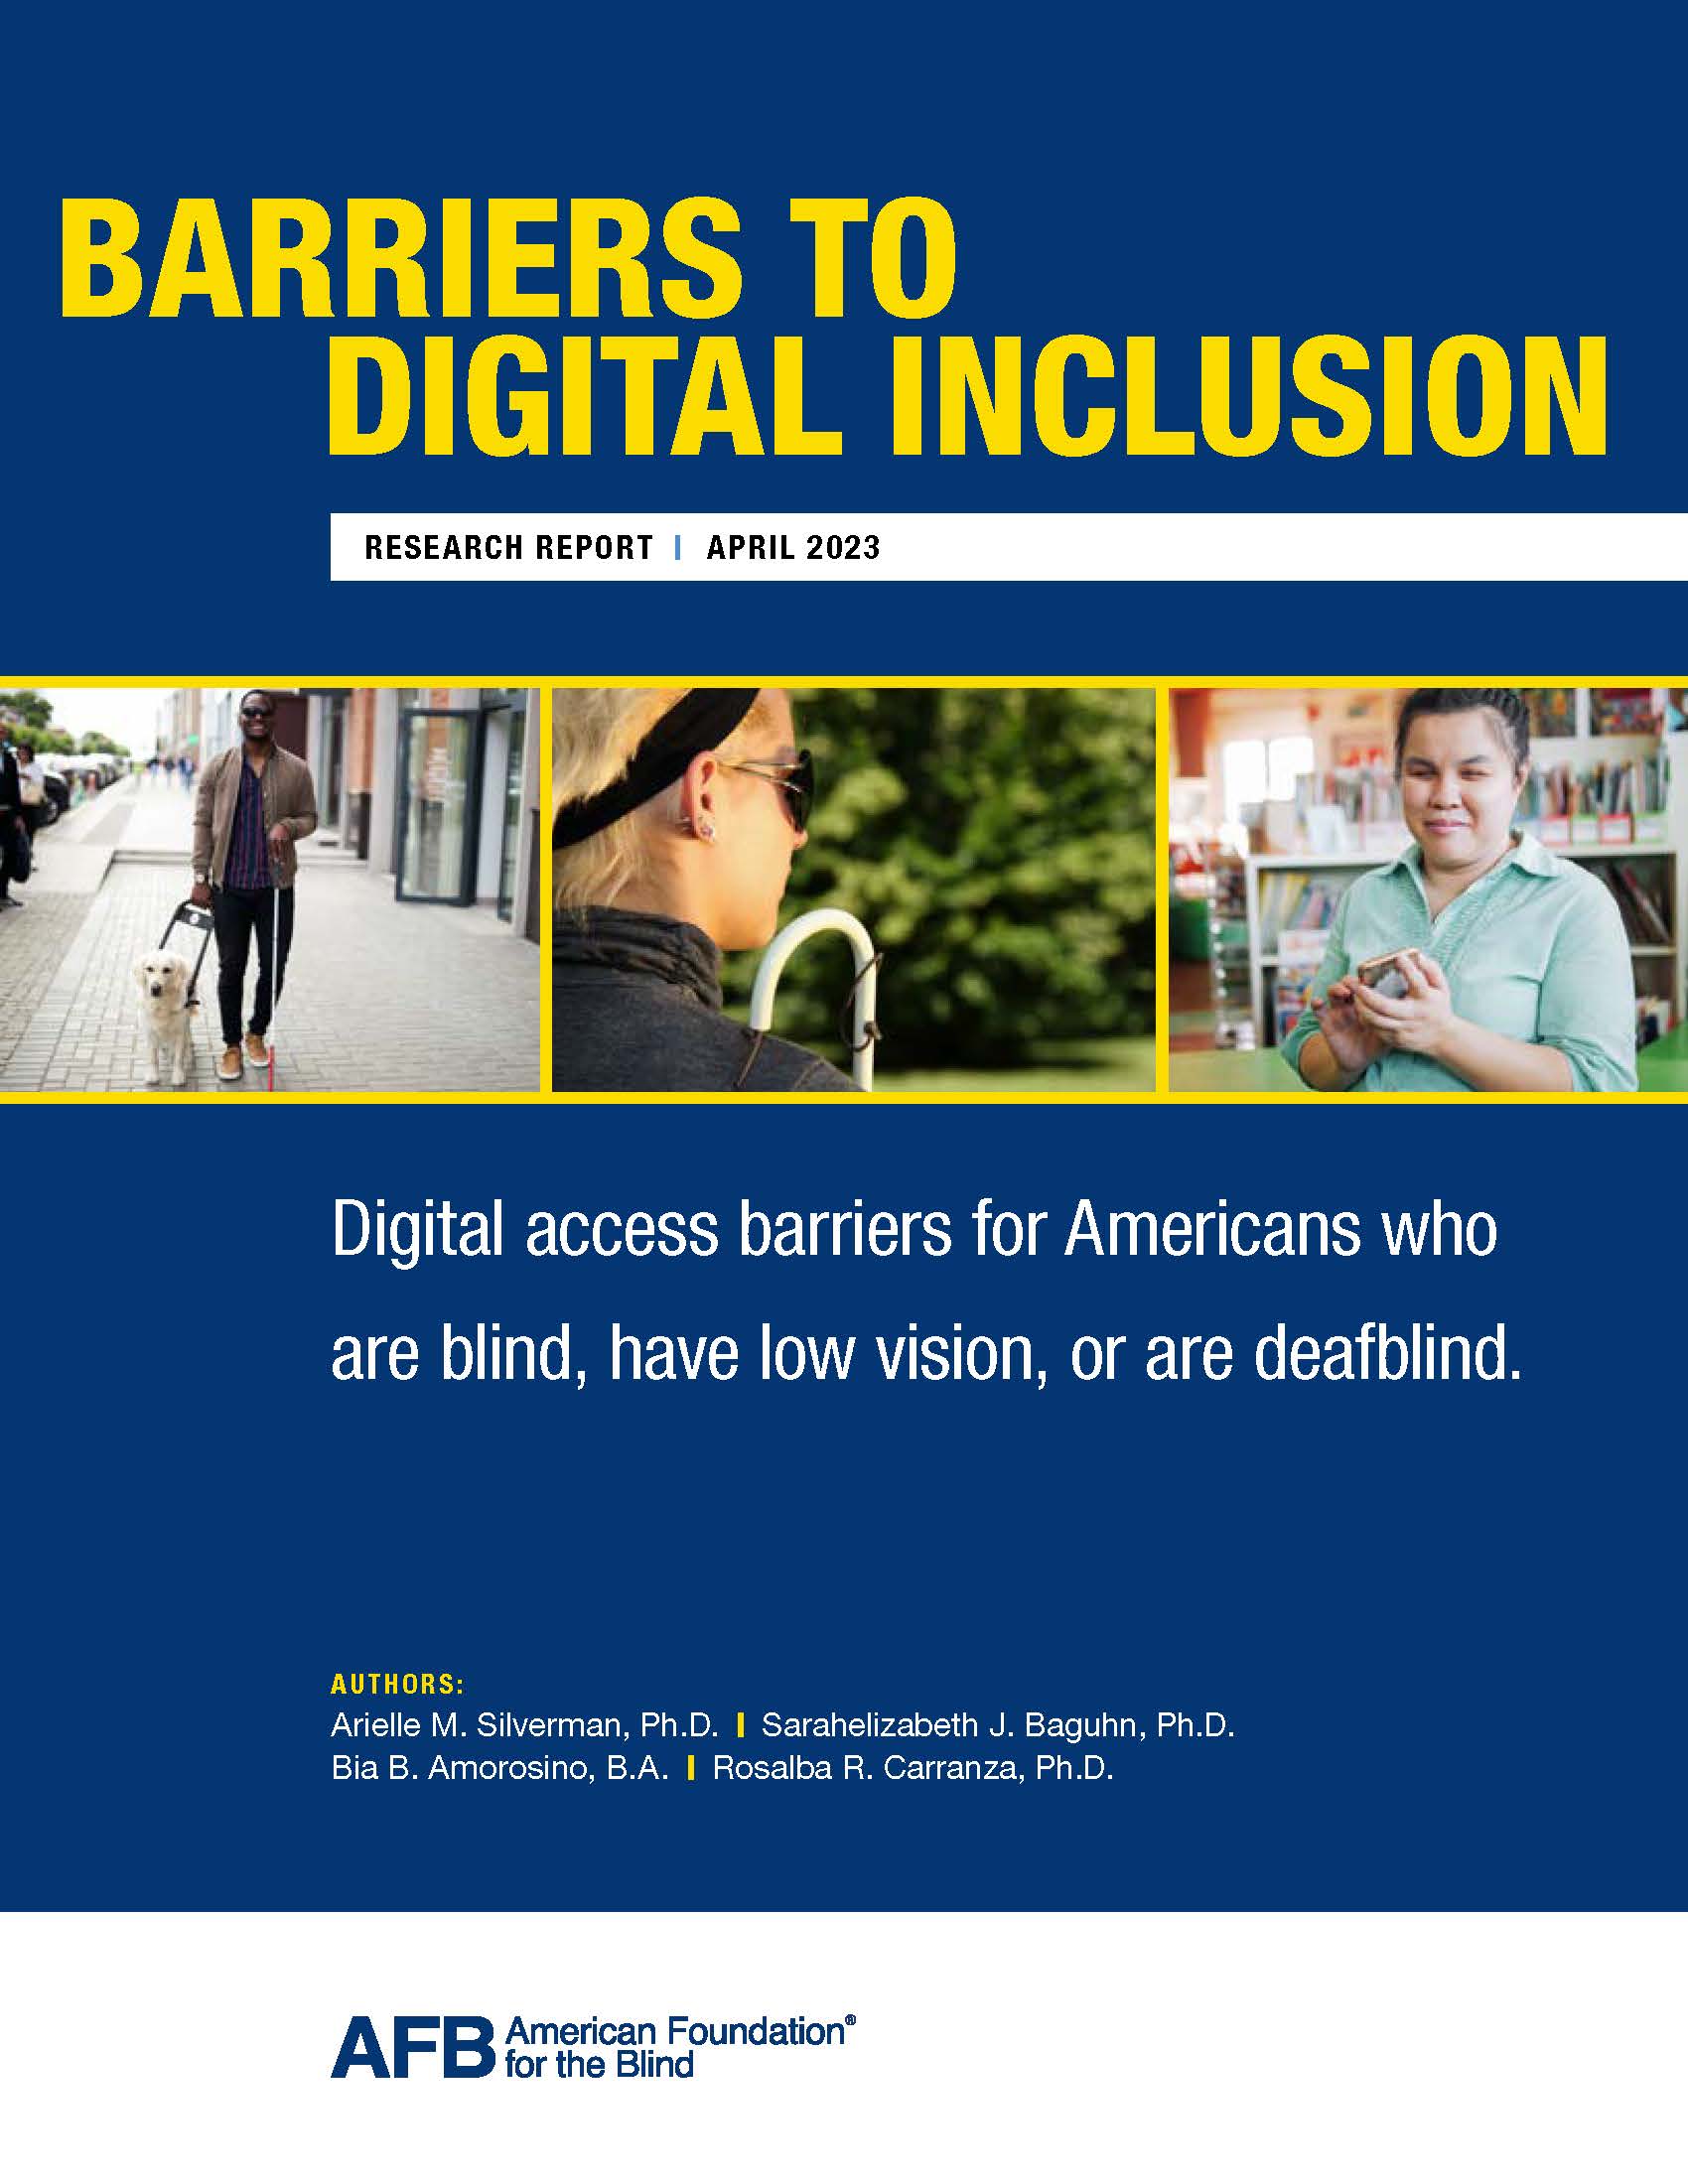 AFB Barriers To Digital Inclusion 2023 Research Report Cover